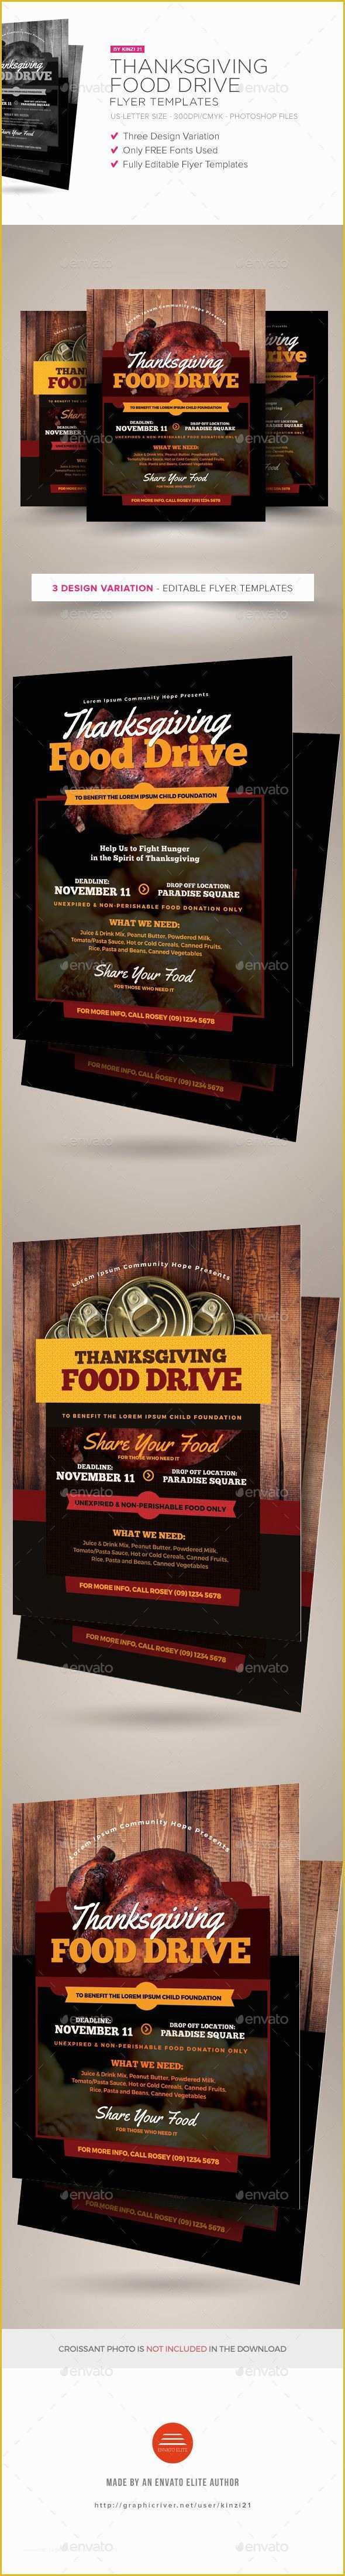 Thanksgiving Food Drive Flyer Template Free Of 1000 Ideas About Food Drive On Pinterest